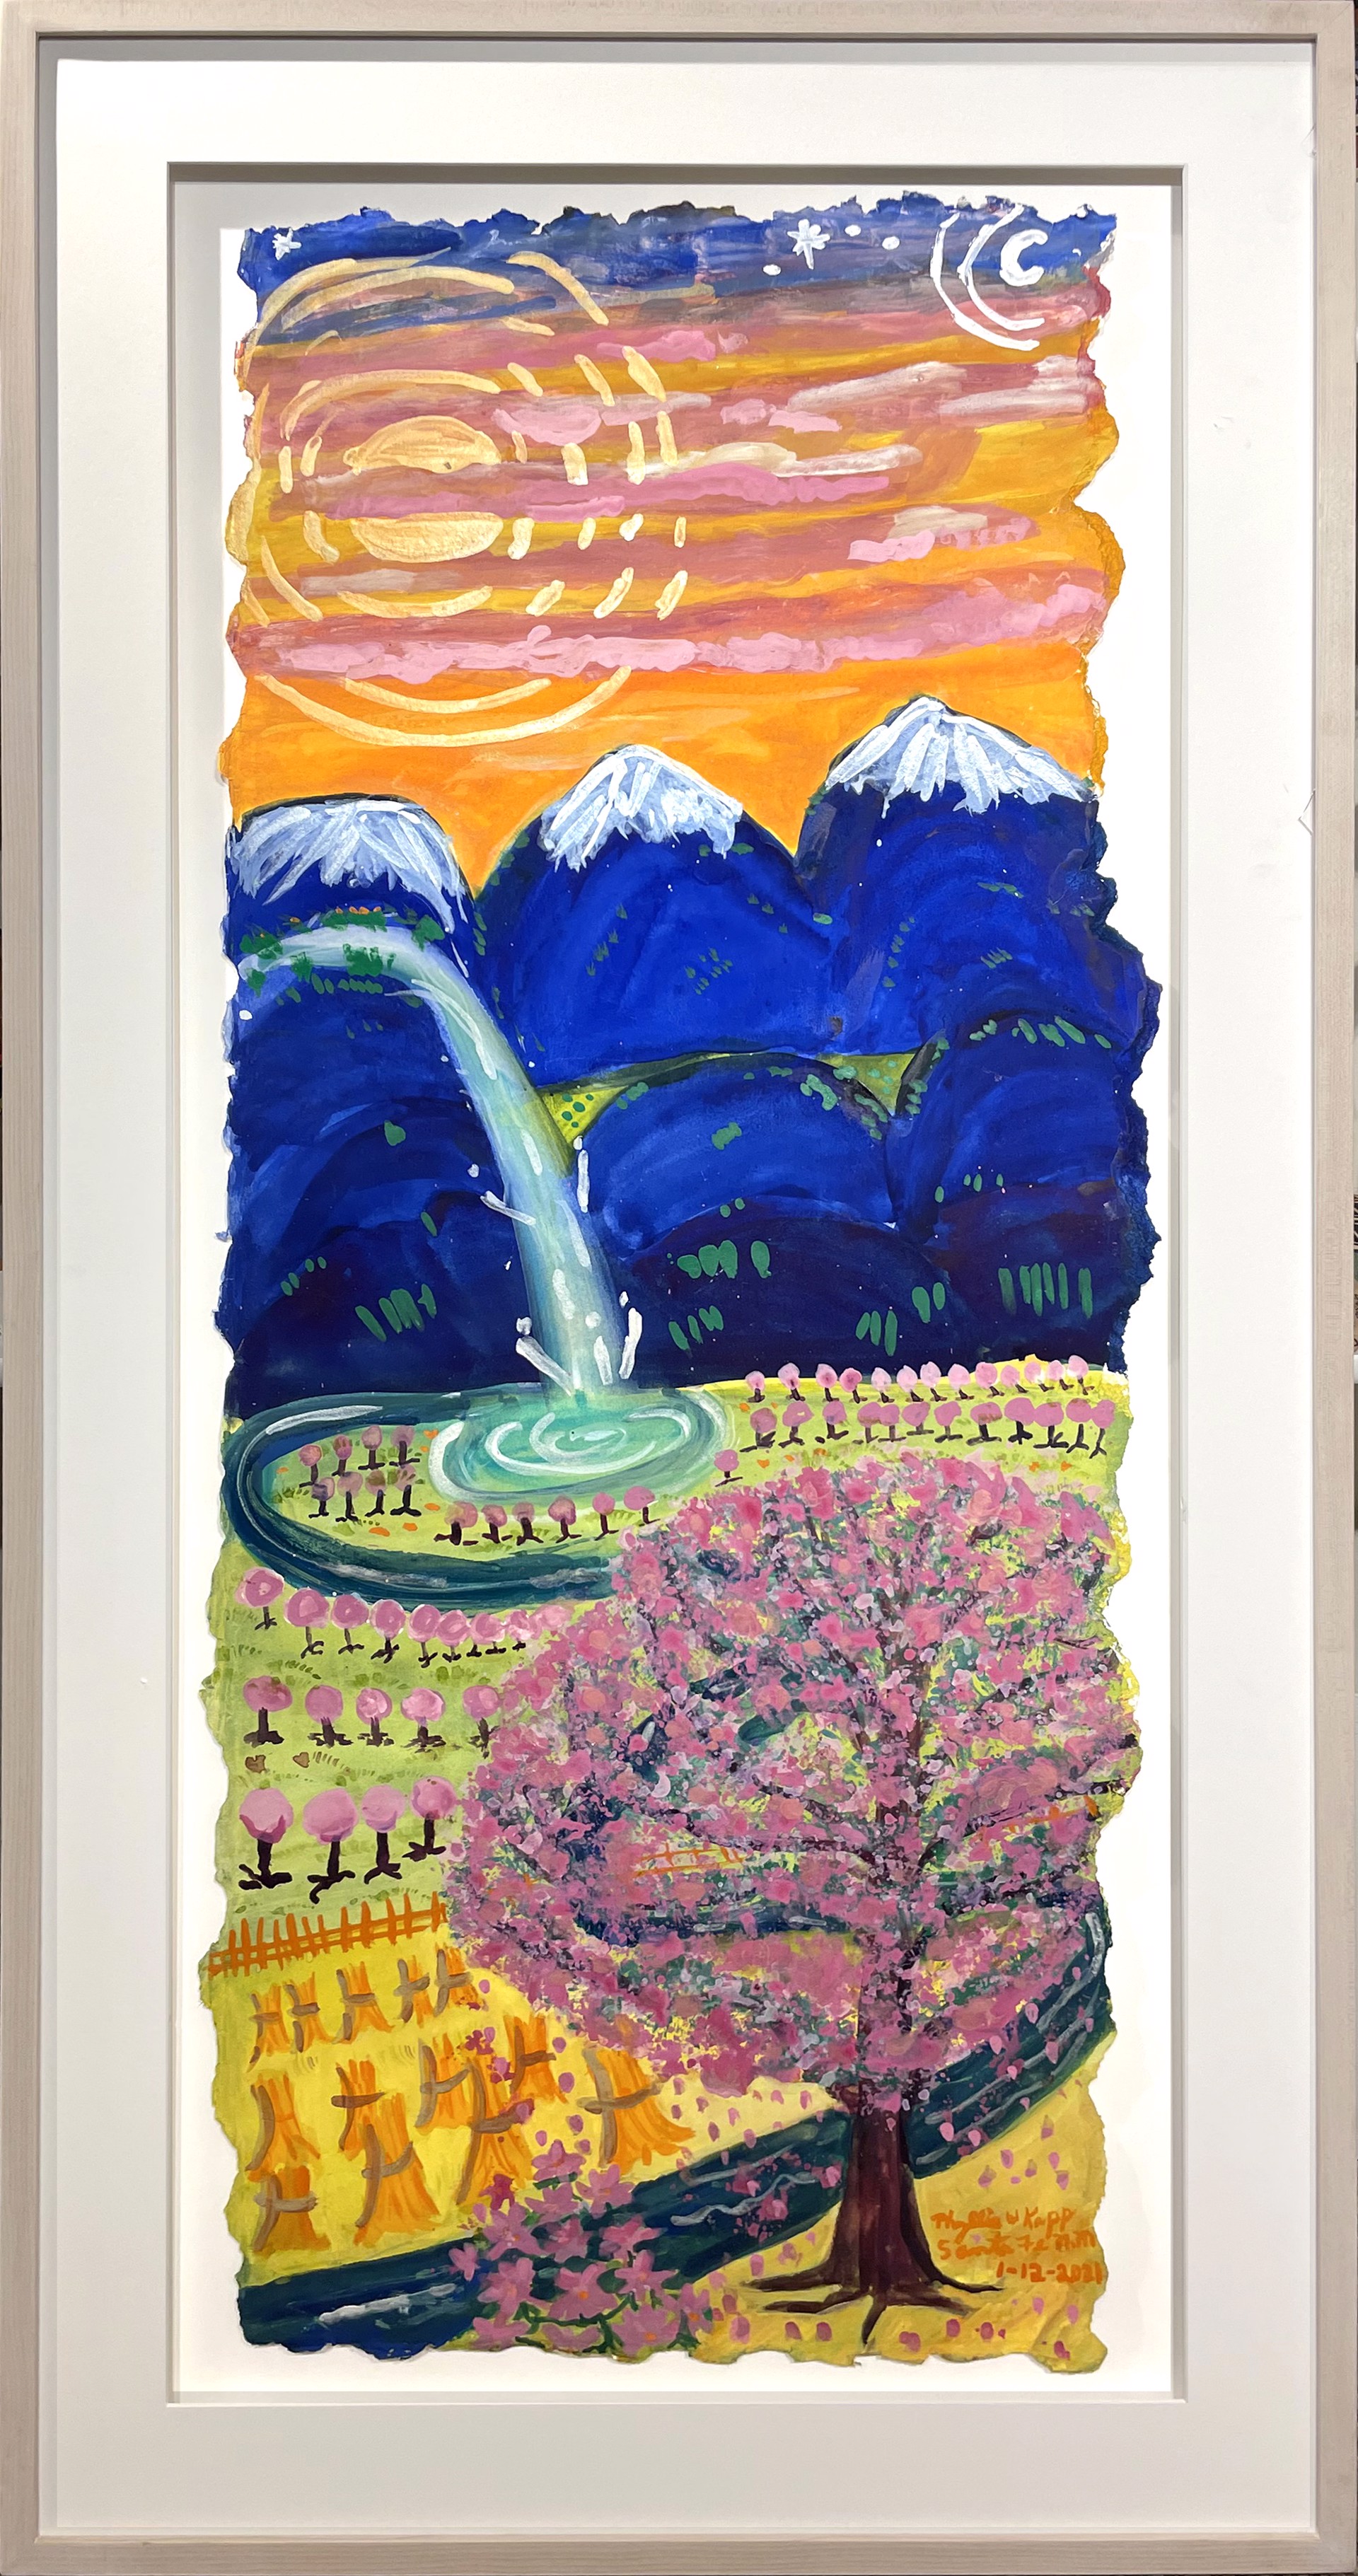 The Endless Springs of Love (54.5x27.5 framed) by Phyllis Kapp